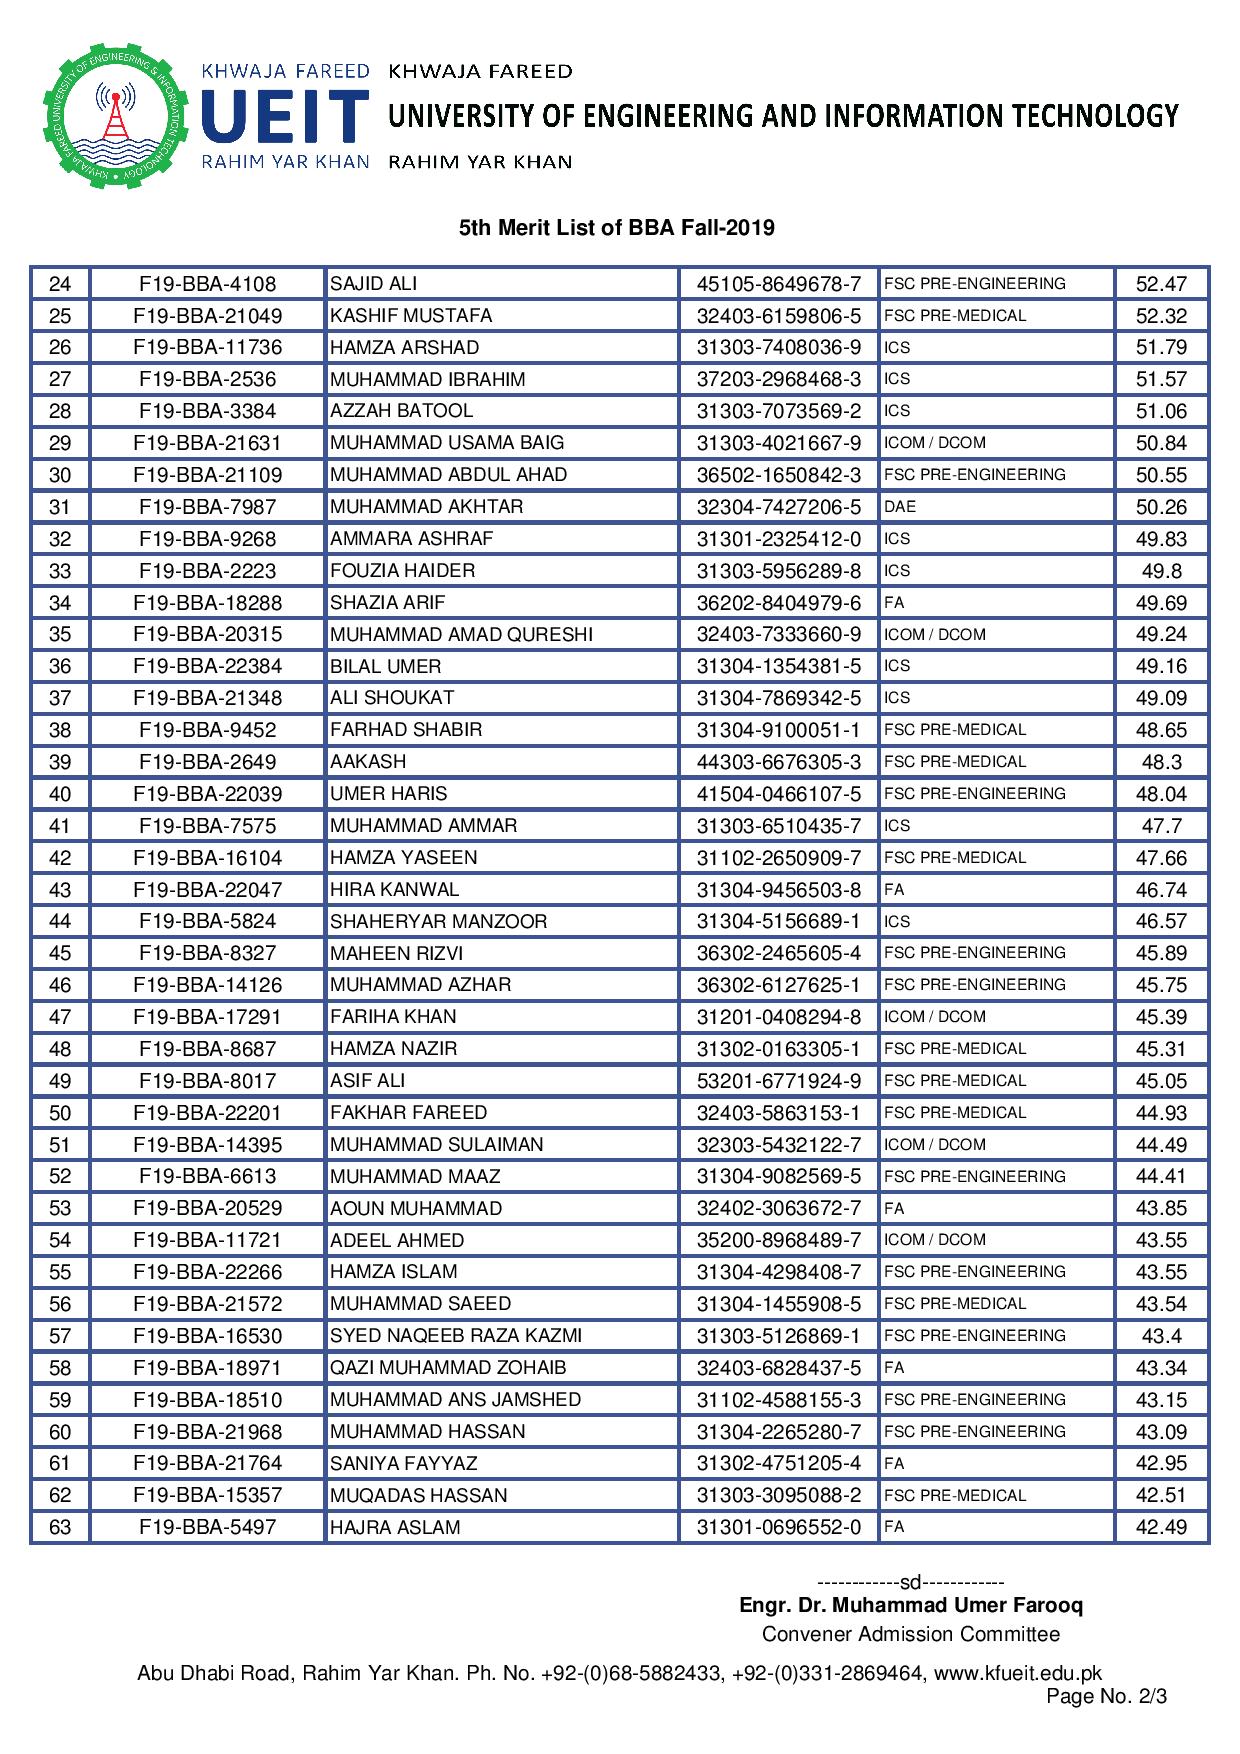 5th Merit List of BBA Fall-2019-page-002